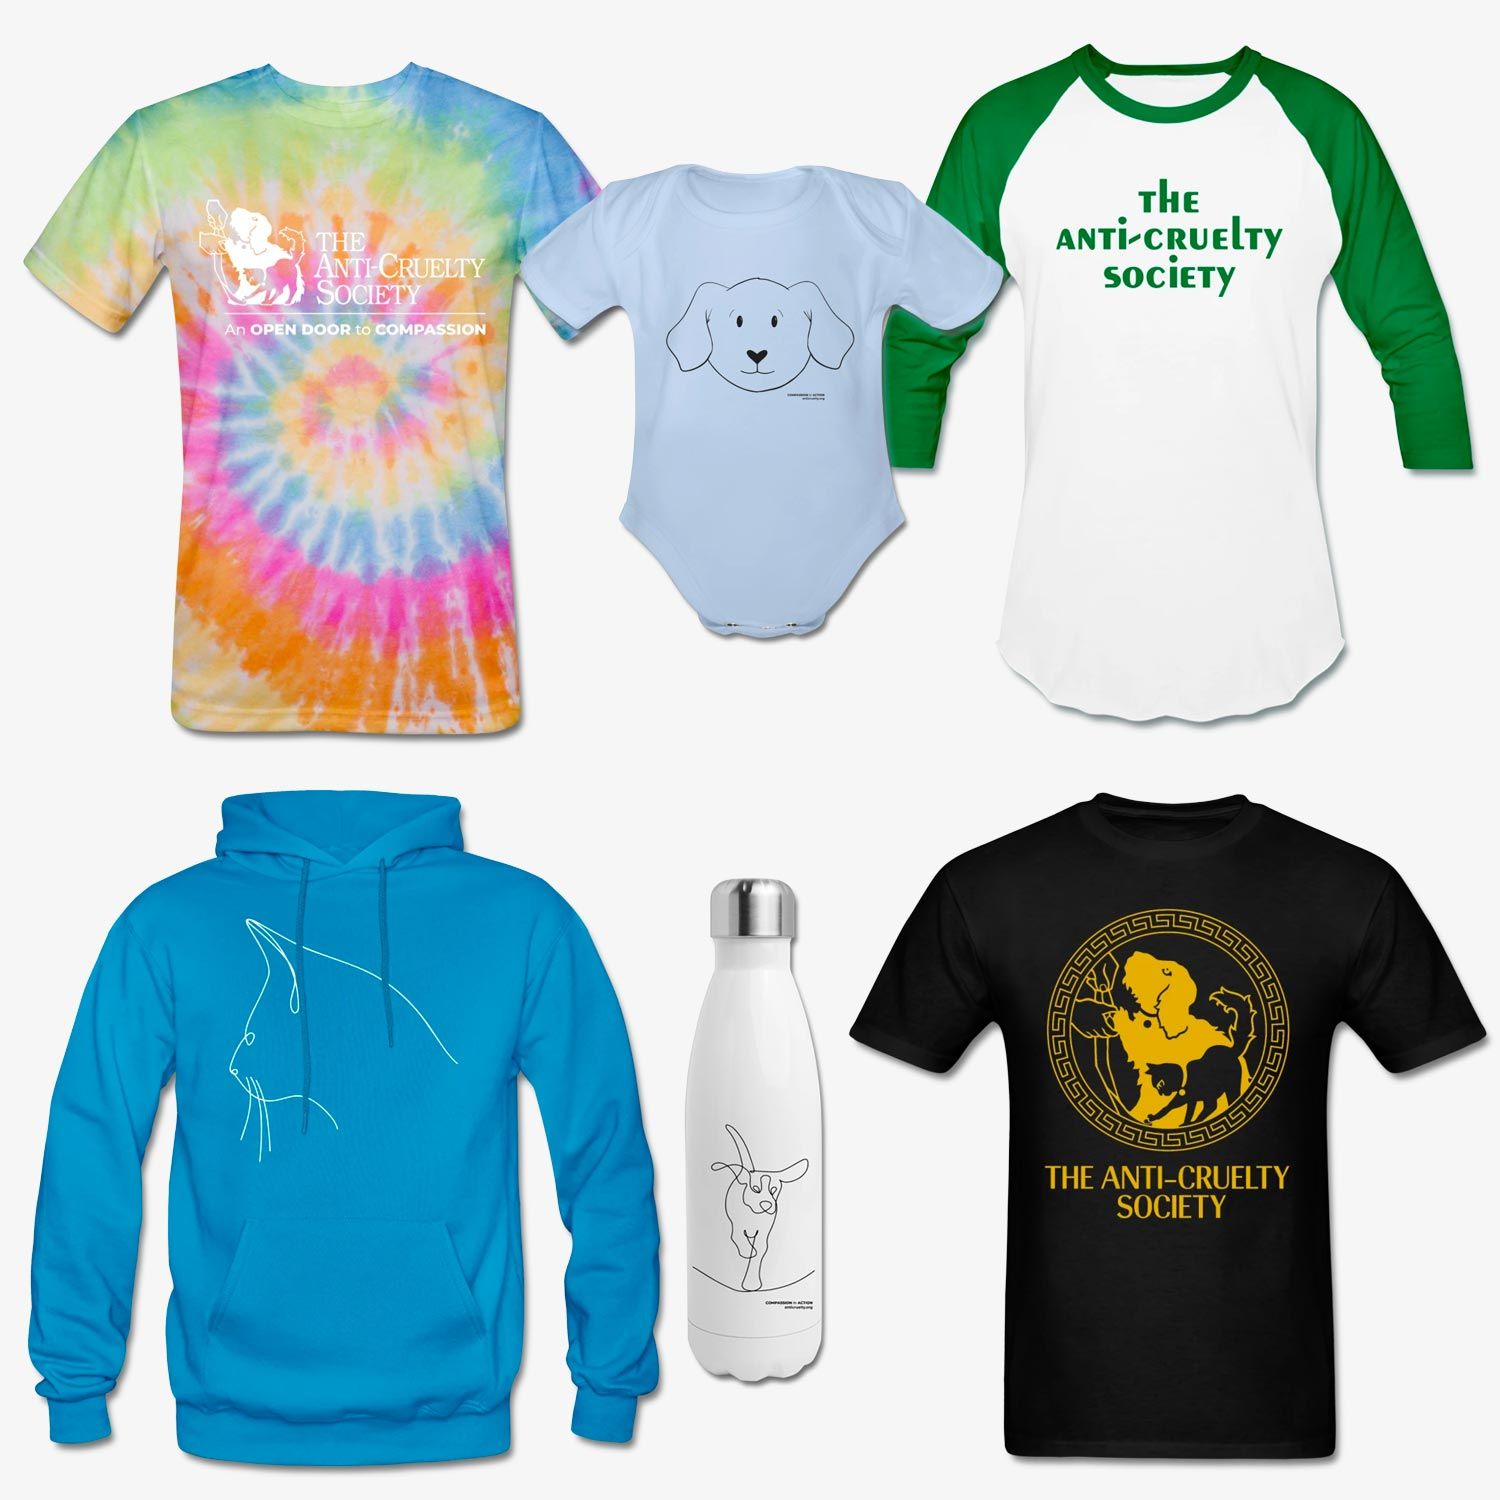 six items from store tshirts and bottle